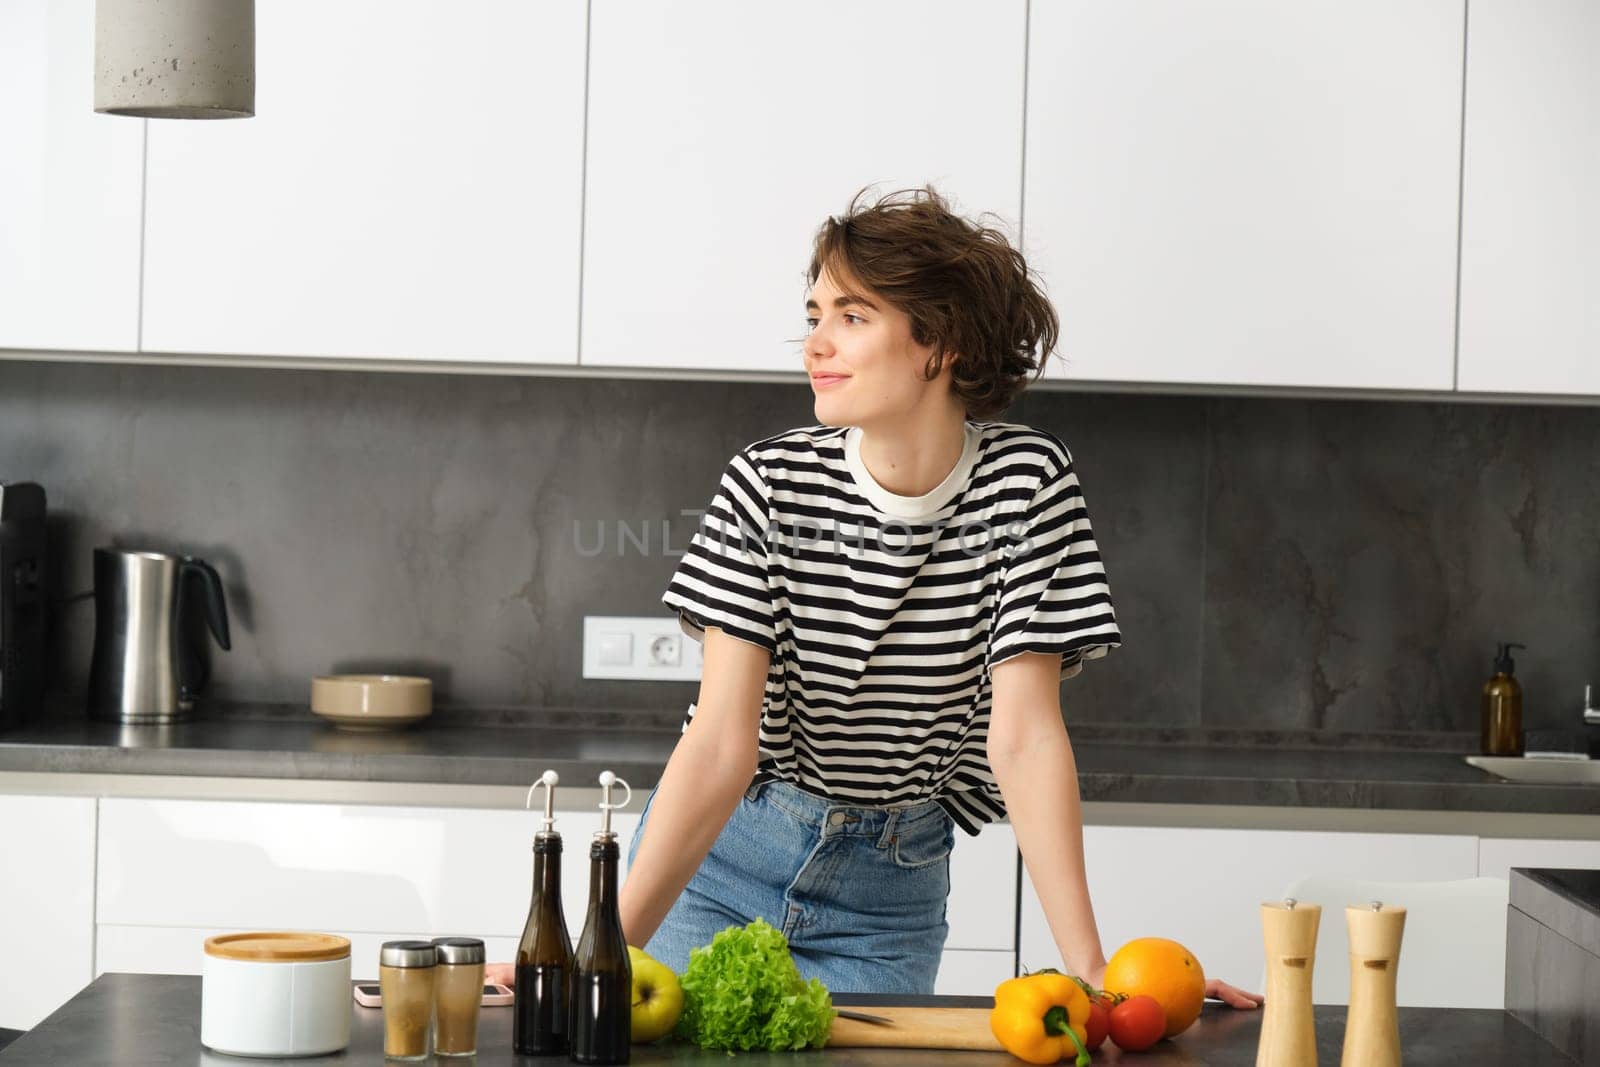 Portrait of young modern woman in the kitchen, leaning on counter with chopping board, making a salad with vegetables and dressings, cooking vegetarian meal.